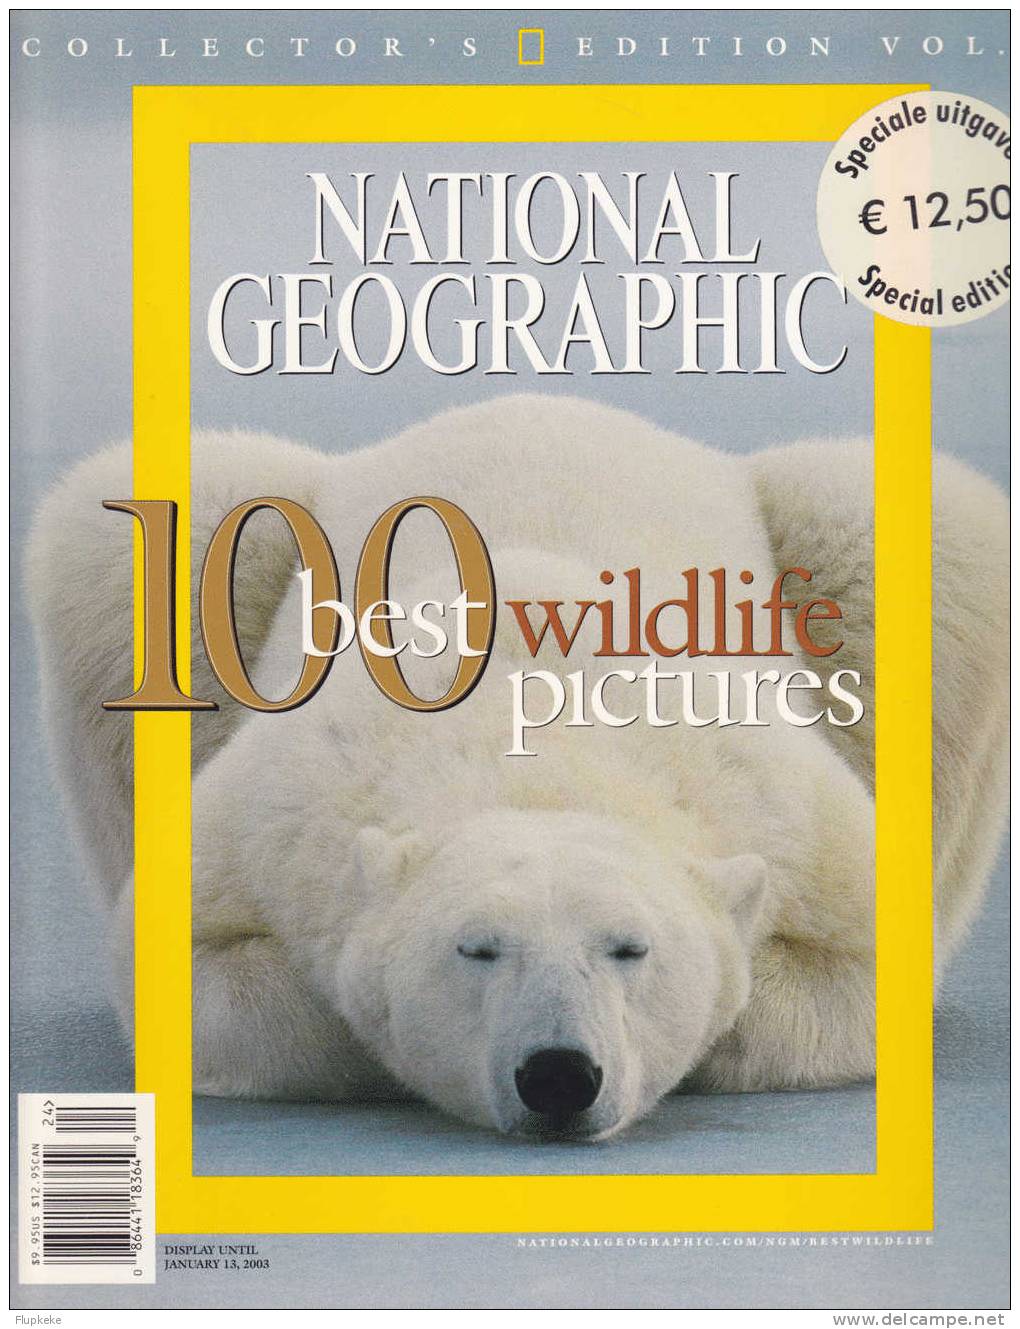 National Geographic Collector´s Edition Vol. 3 January 2003 - Voyage/ Exploration